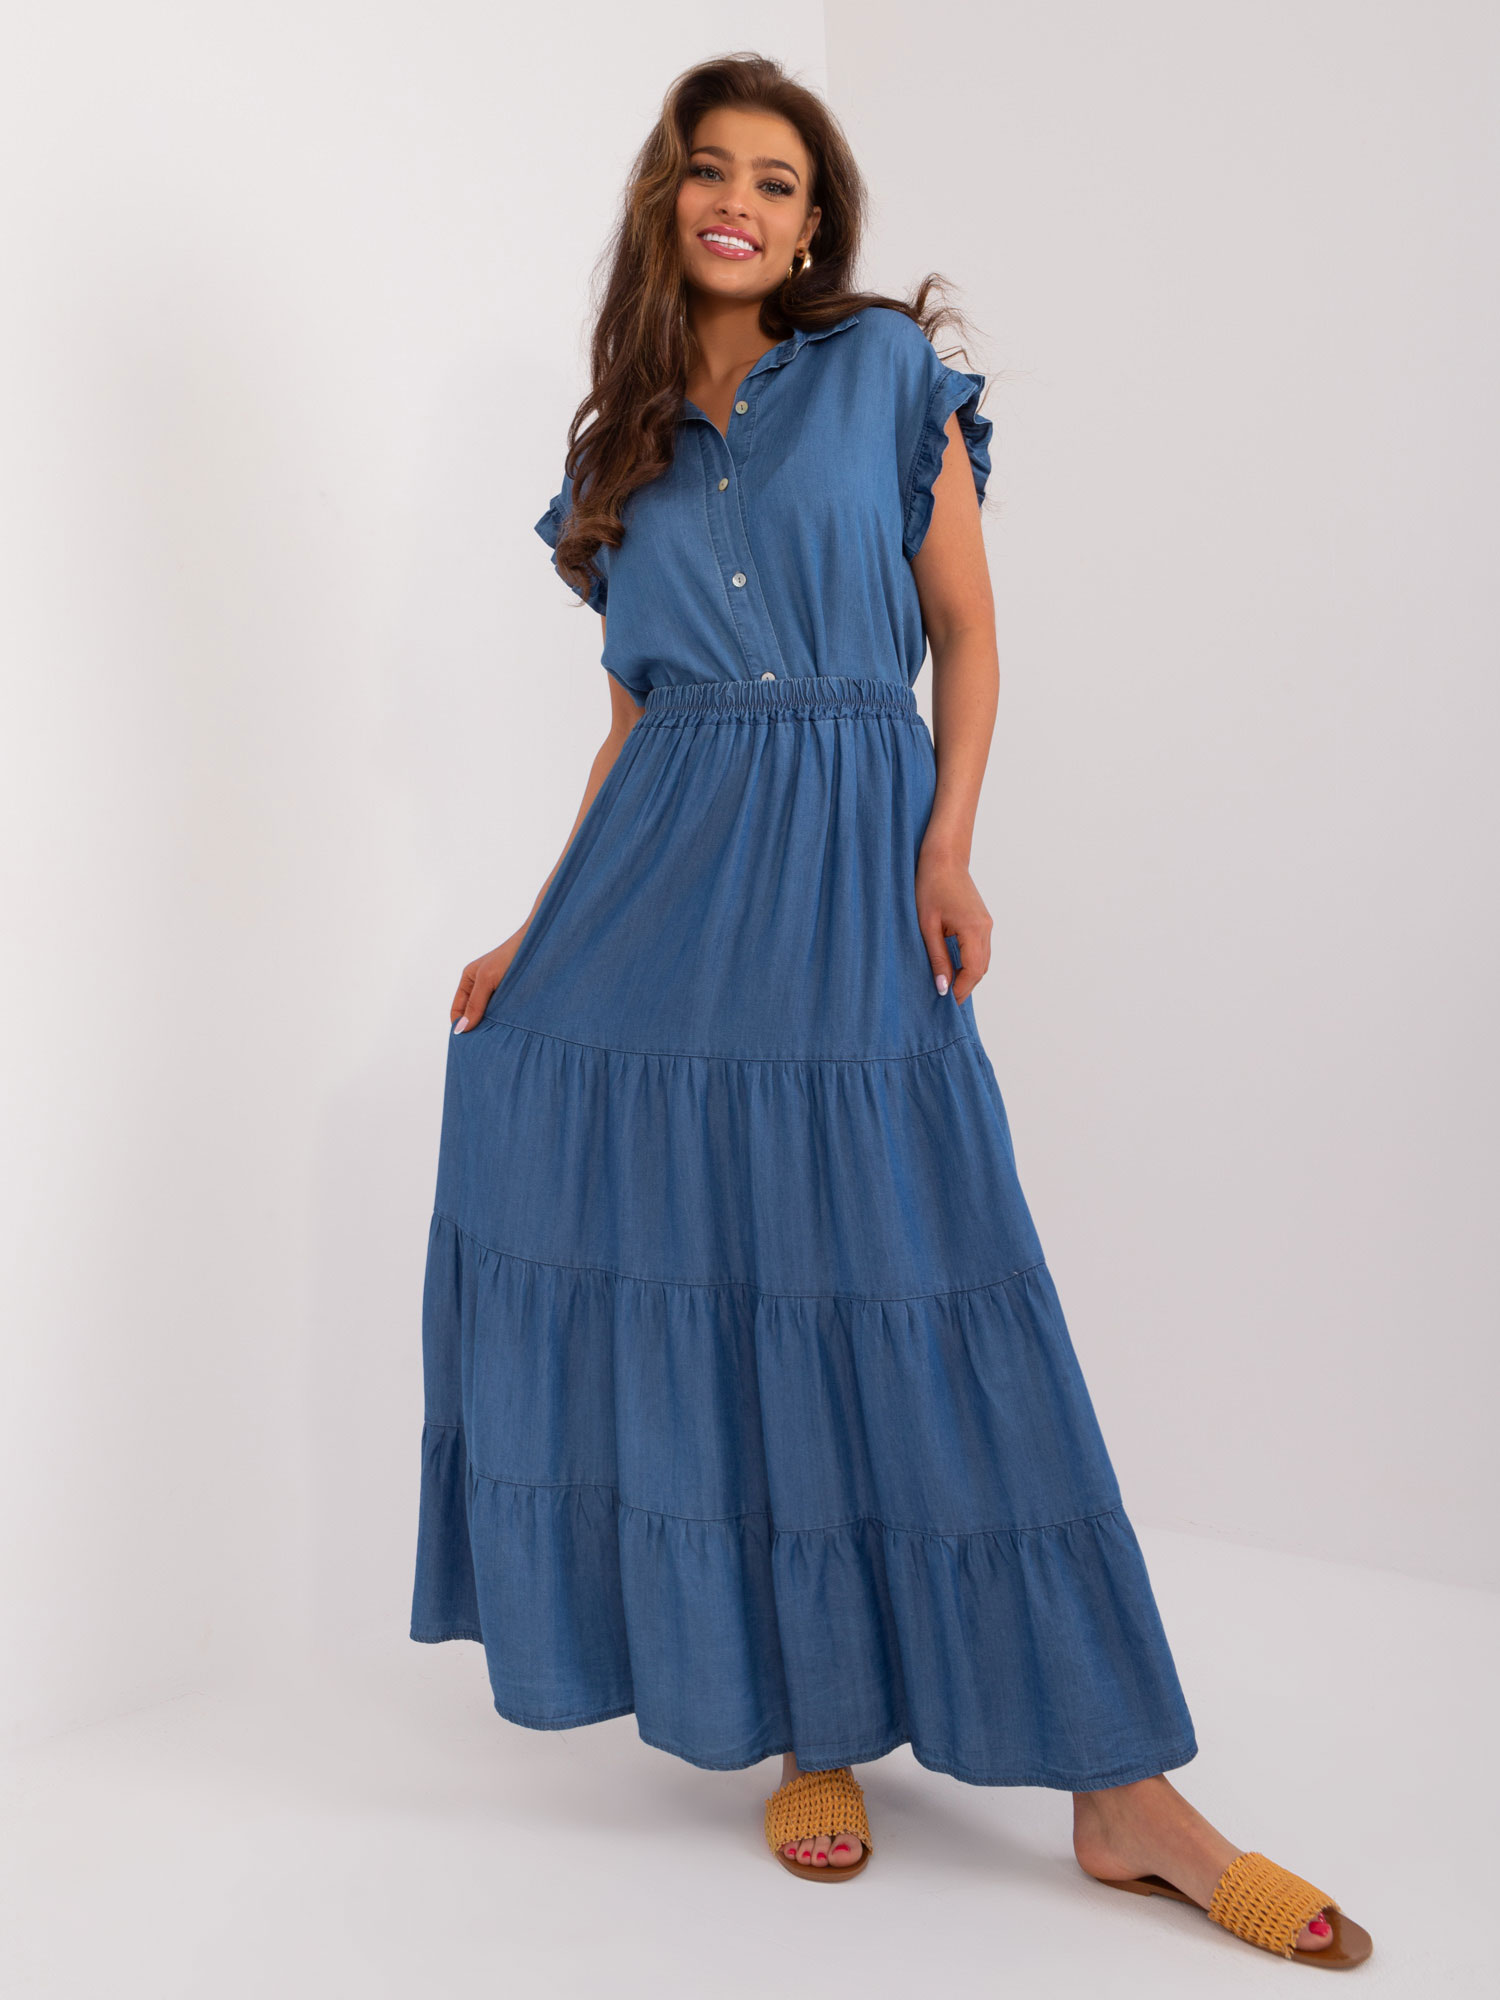 Navy blue flared skirt with ruffles